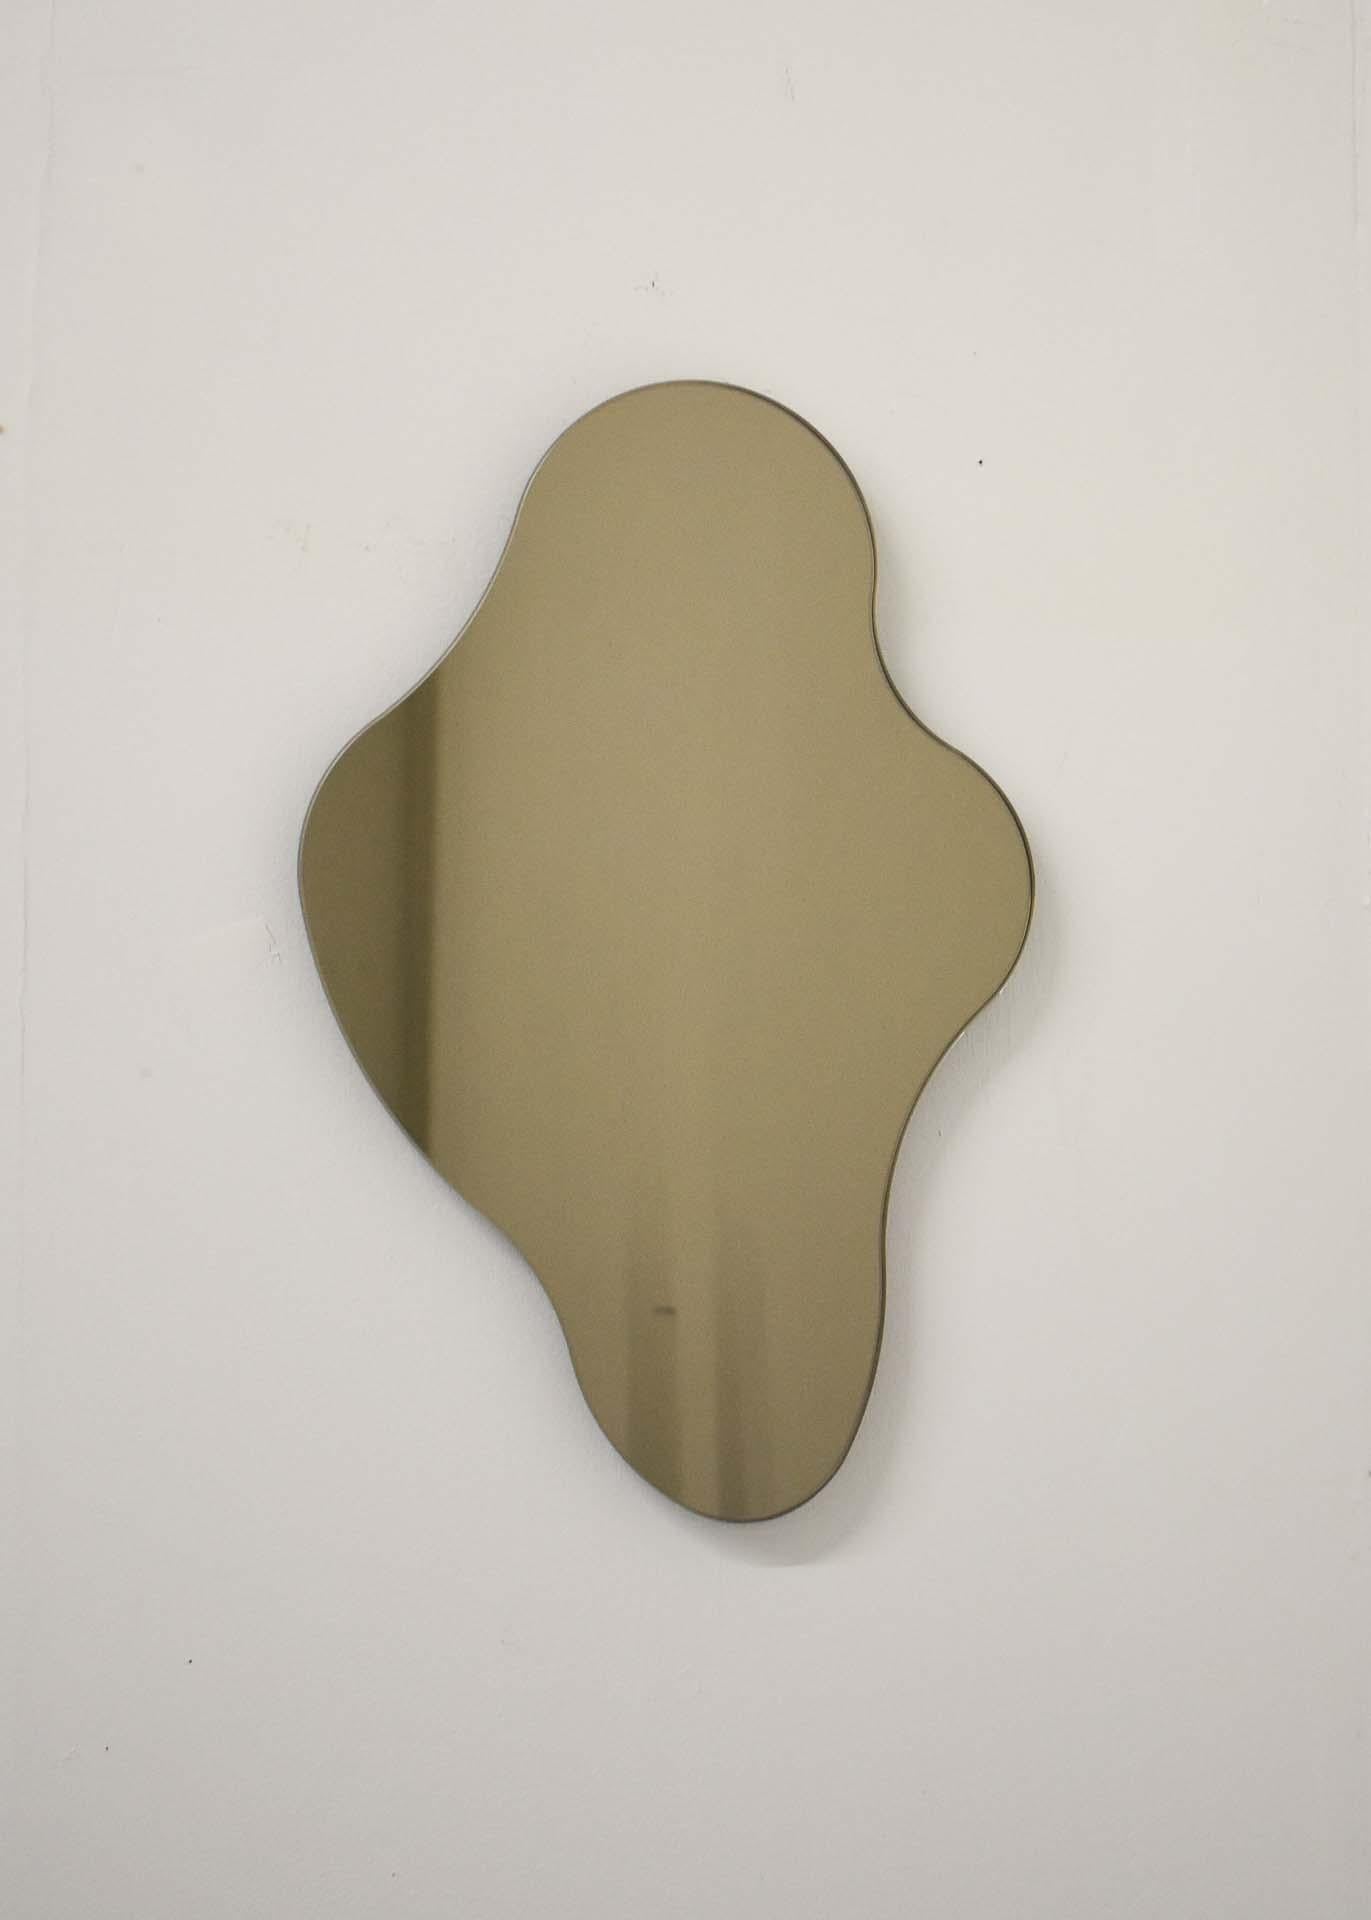 ISLA MIRROR - No. 1
Materials: Bronze Glass, Black MDF 
Dimensions: 10.75”W X 1”D X 16.75”H

Minimalist, elegant, amorphically shaped floating bronze glass mirrors inspired by the topography of the Philippine archipelago. The ISLA Mirrors are